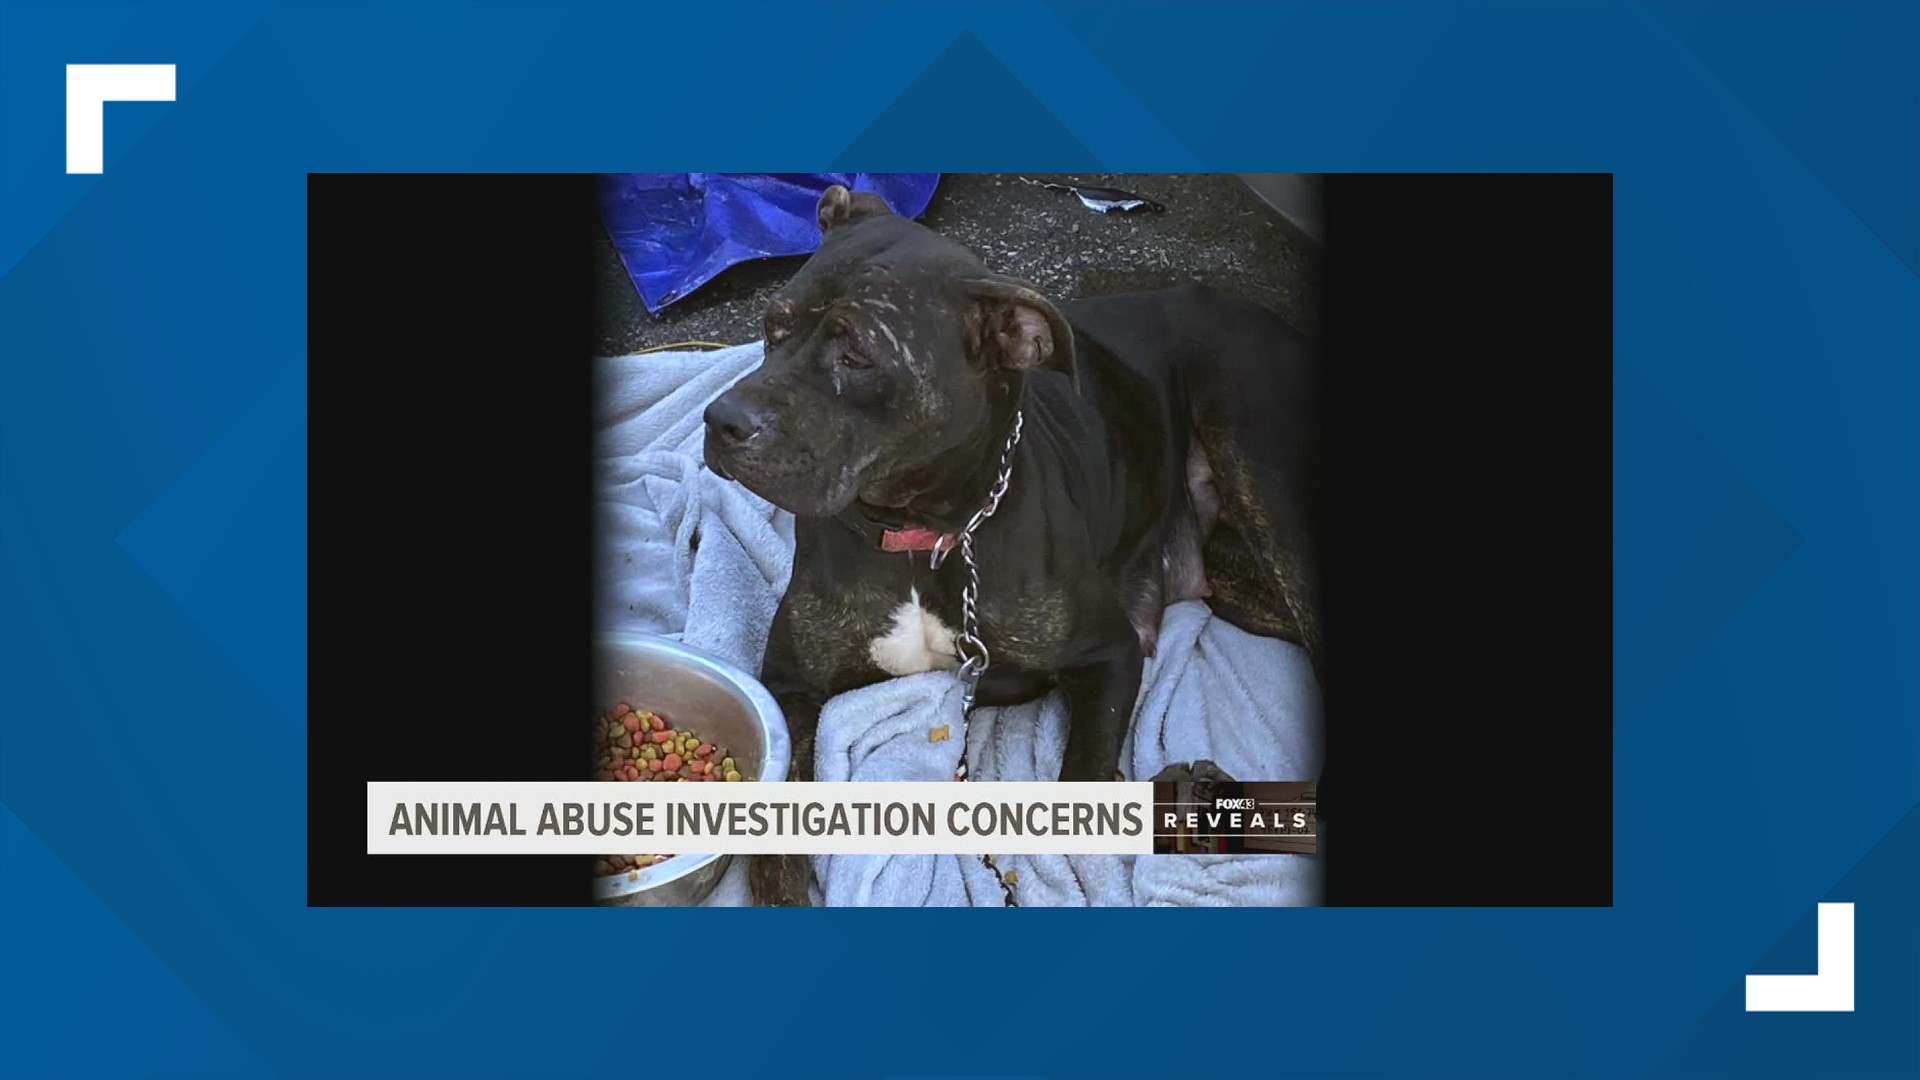 A collapse in communication almost cost two dogs their lives in York County. FOX43 Reveals how resources are stretched thin for some animal cruelty investigations.